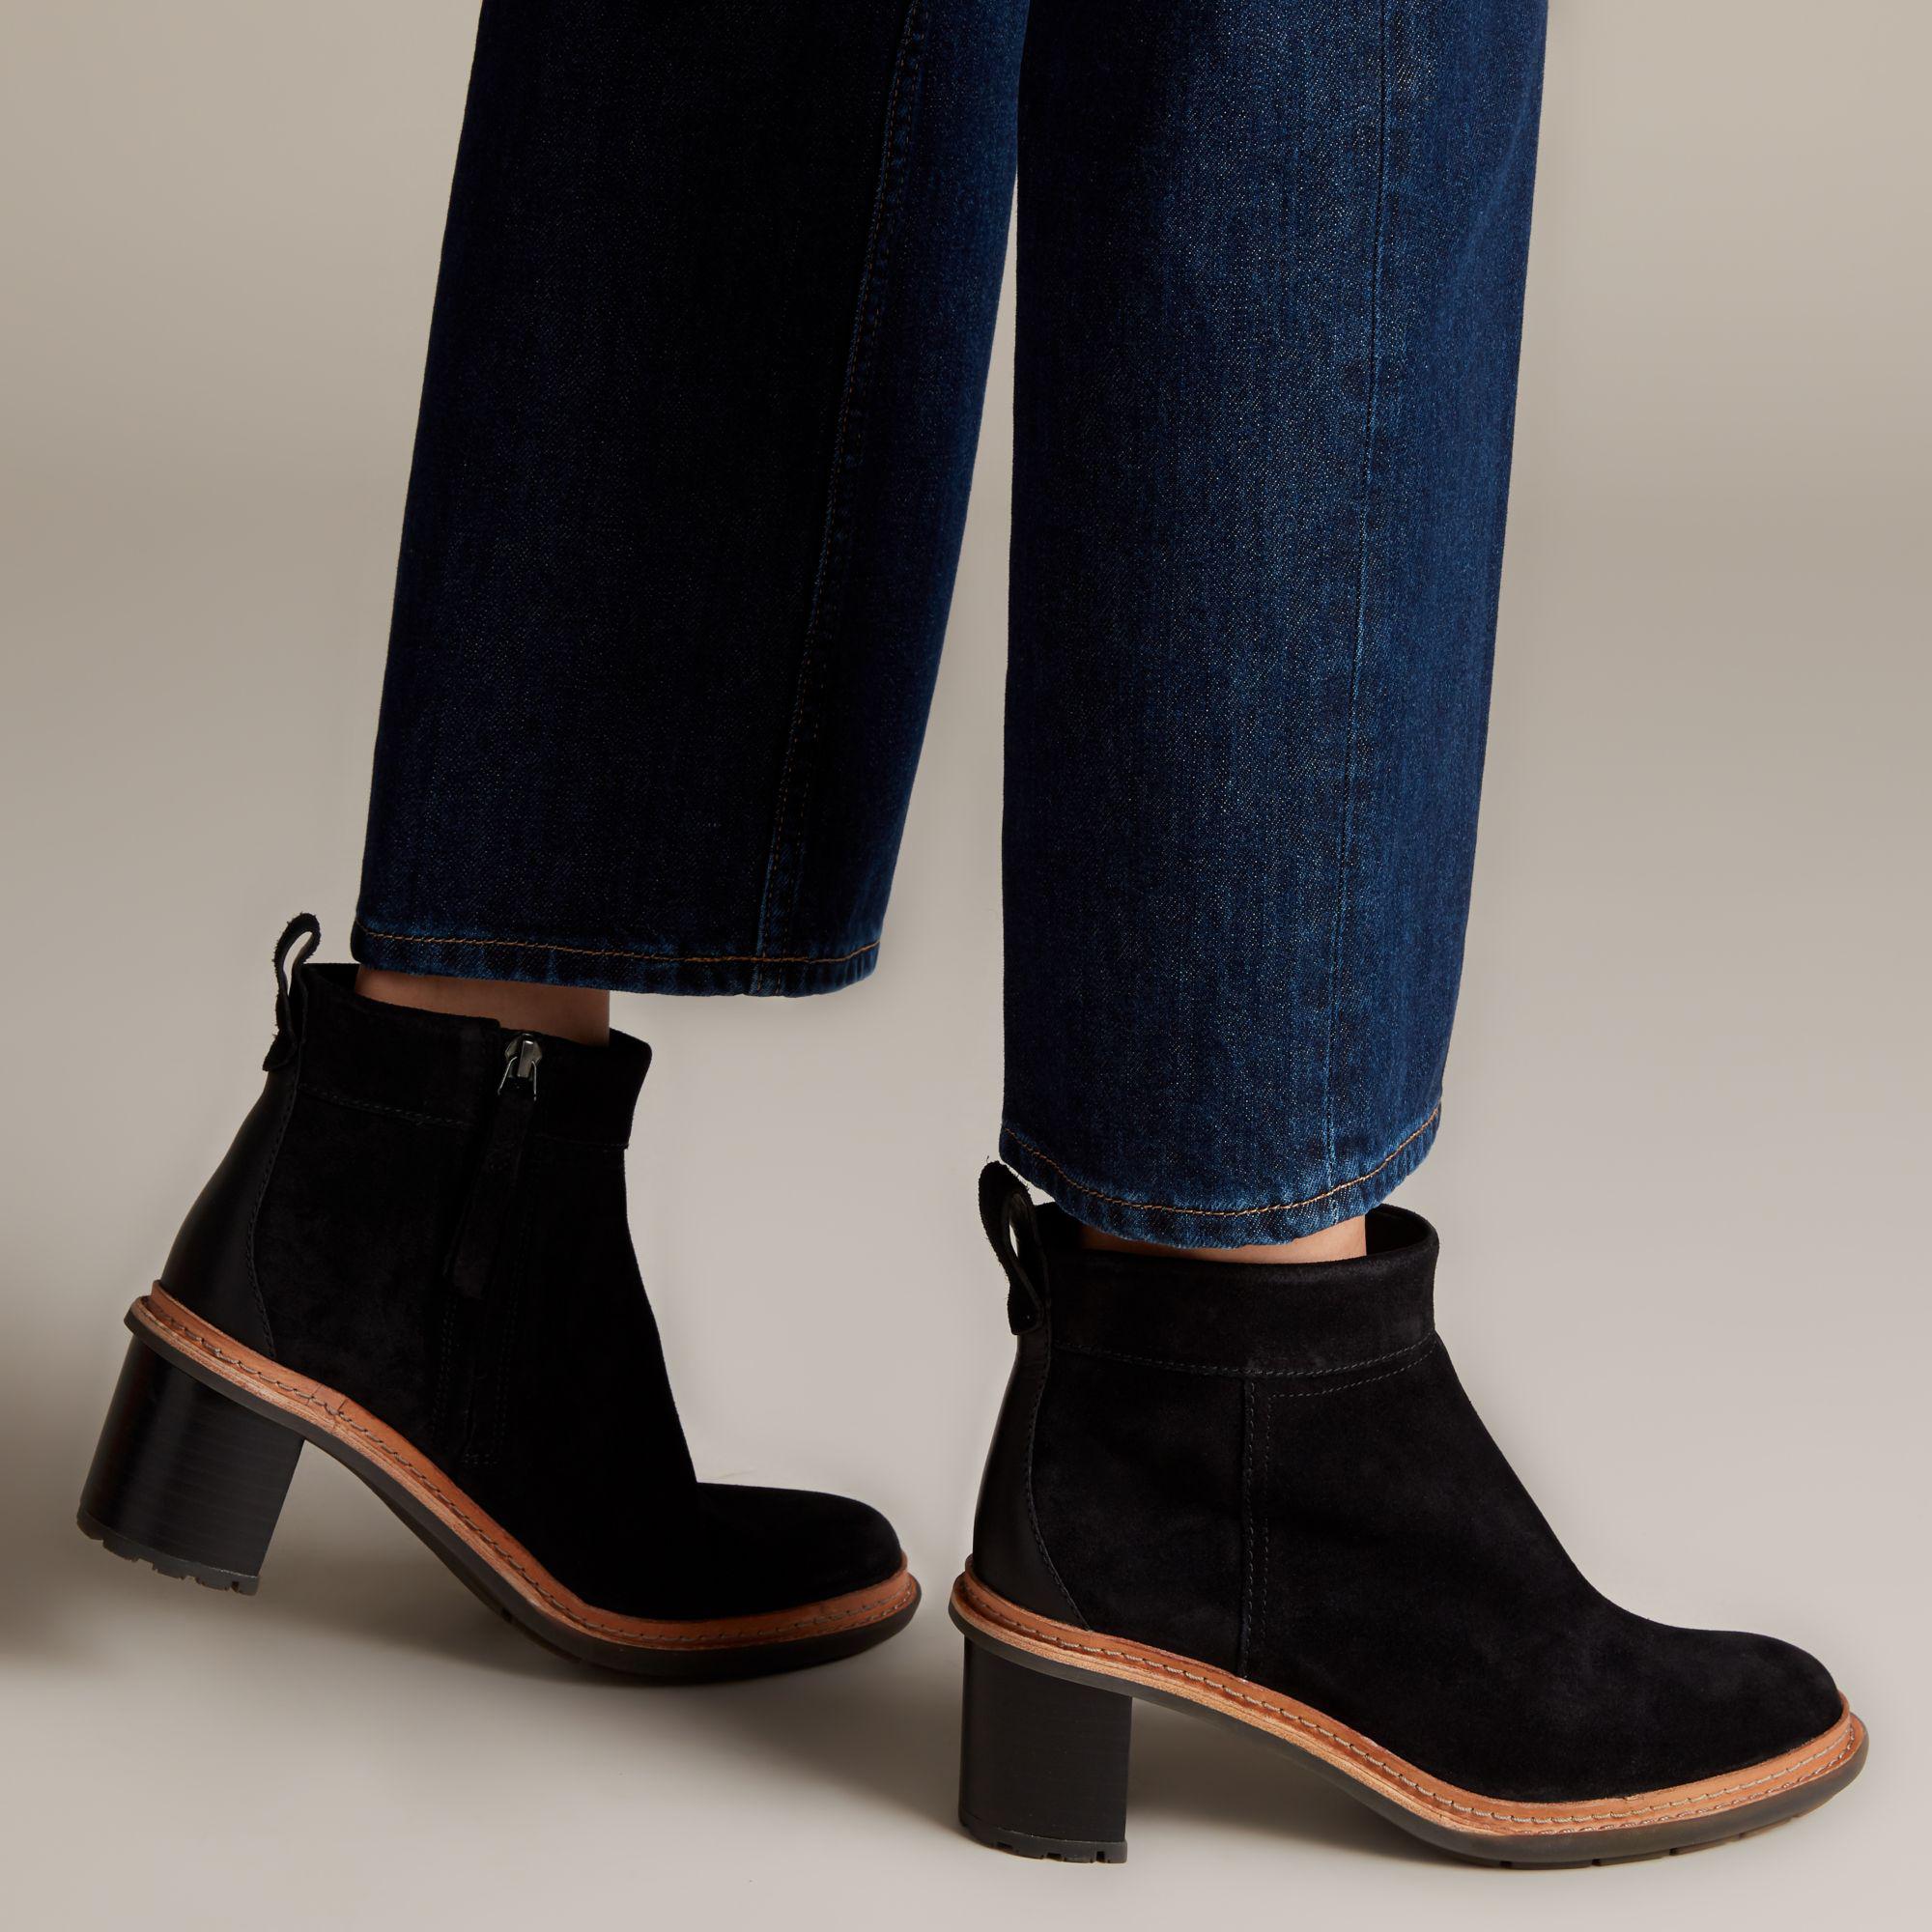 Clarks Trace Shine Suede Boots In Black 